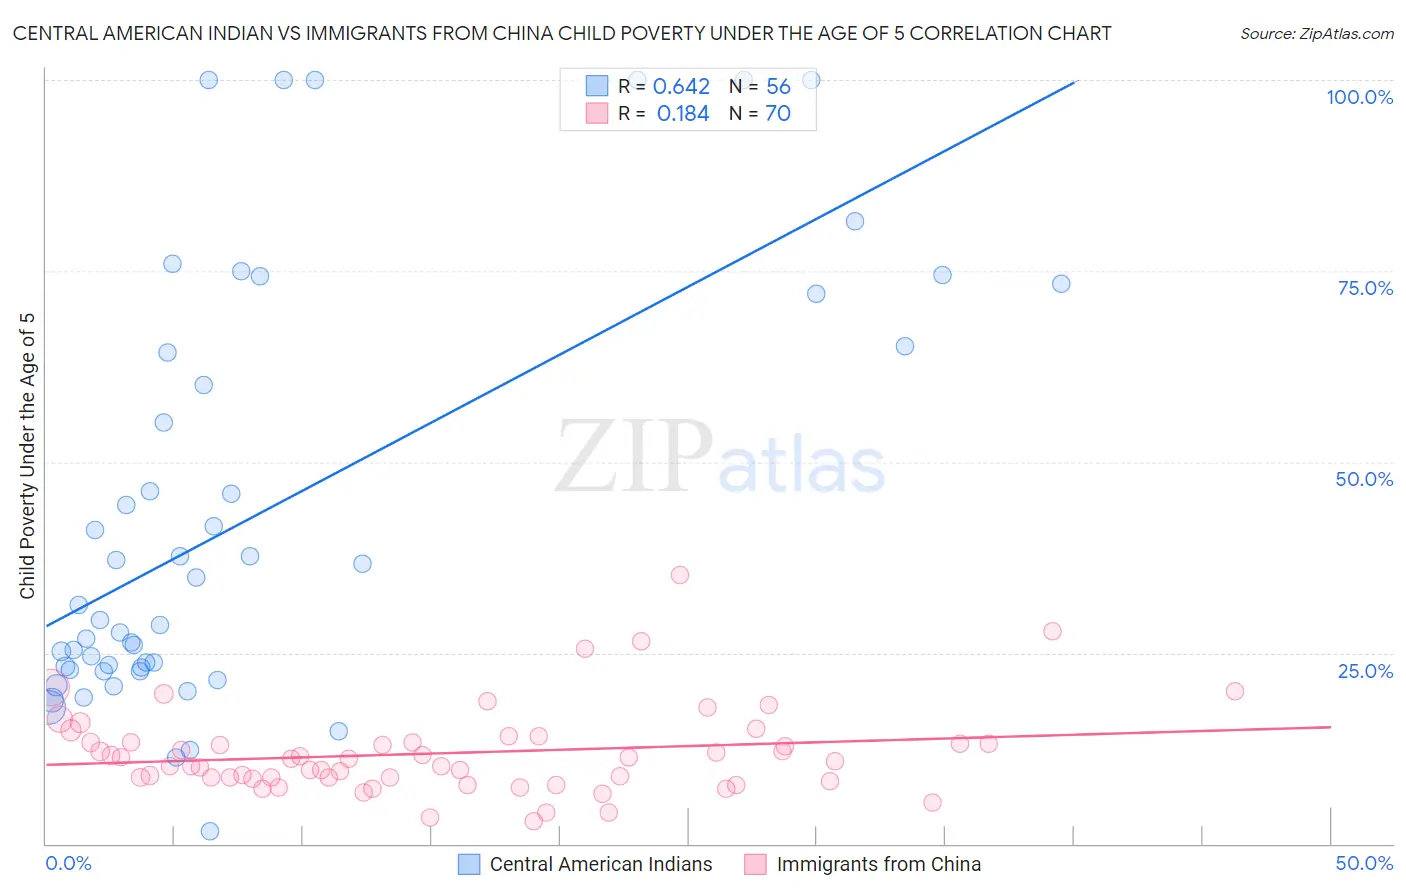 Central American Indian vs Immigrants from China Child Poverty Under the Age of 5